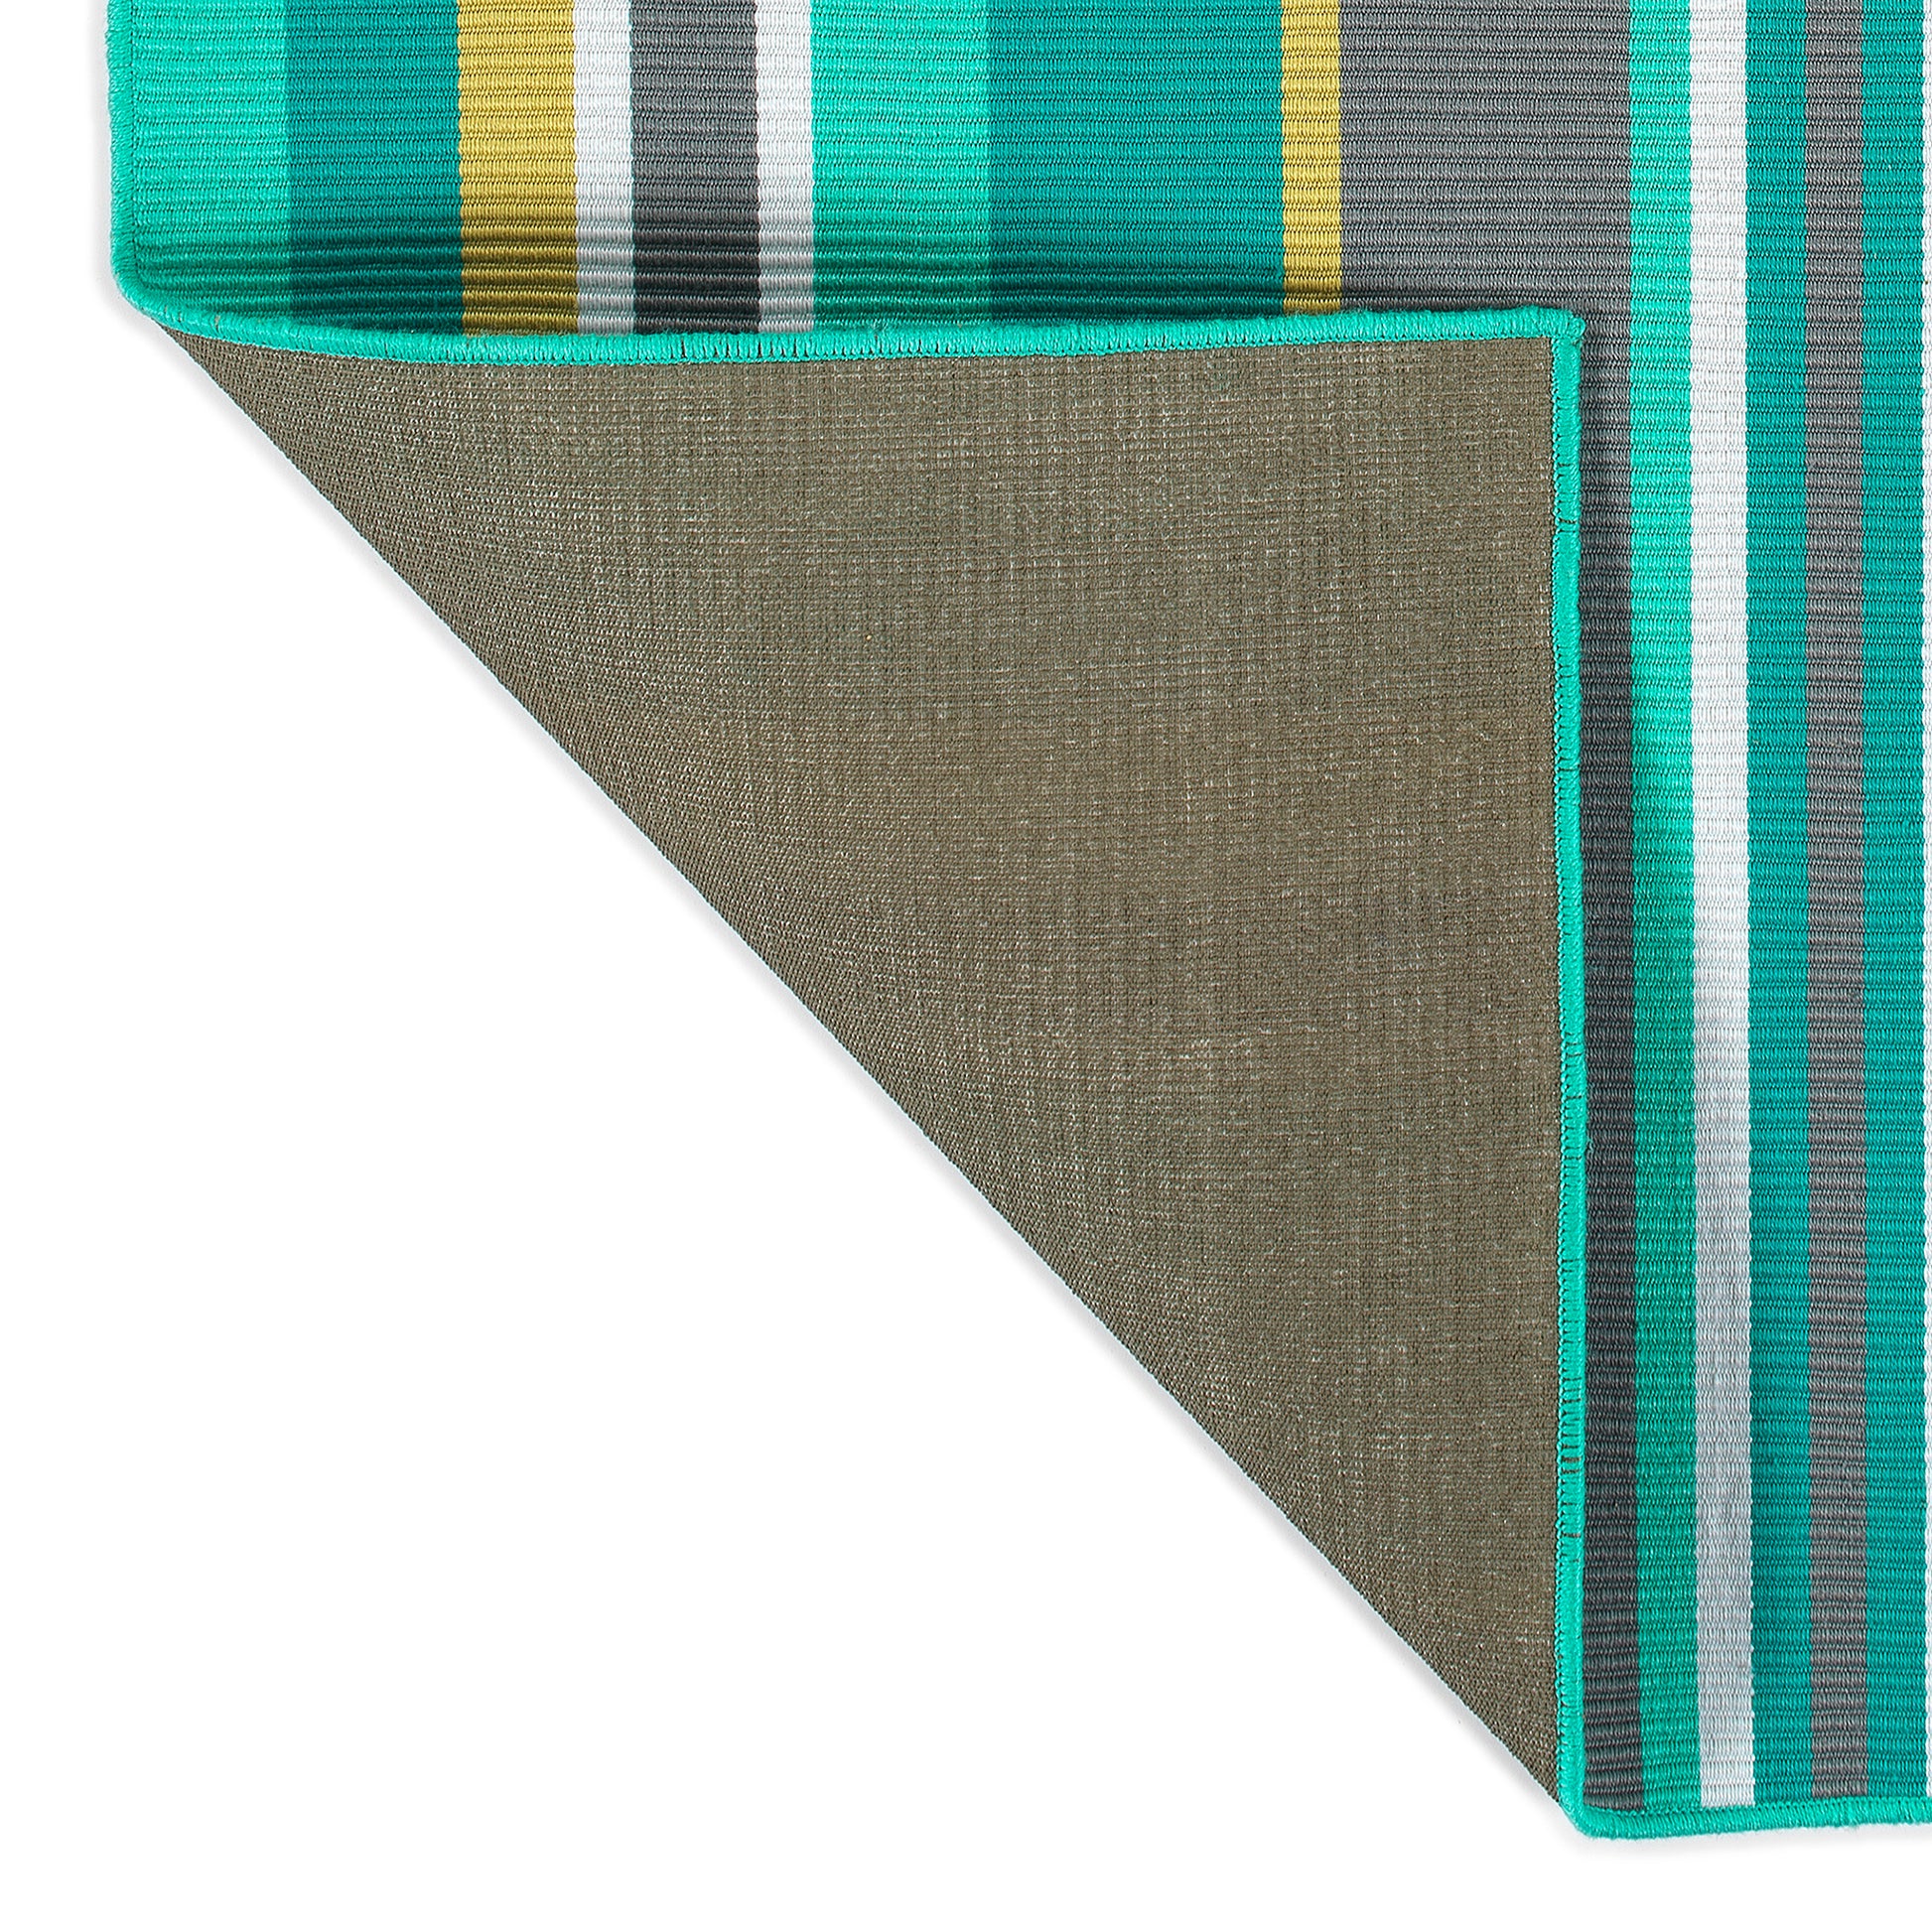 Kaleen Voavah Voa08-91 Teal, Turquoise, Gray, Yellow Area Rug